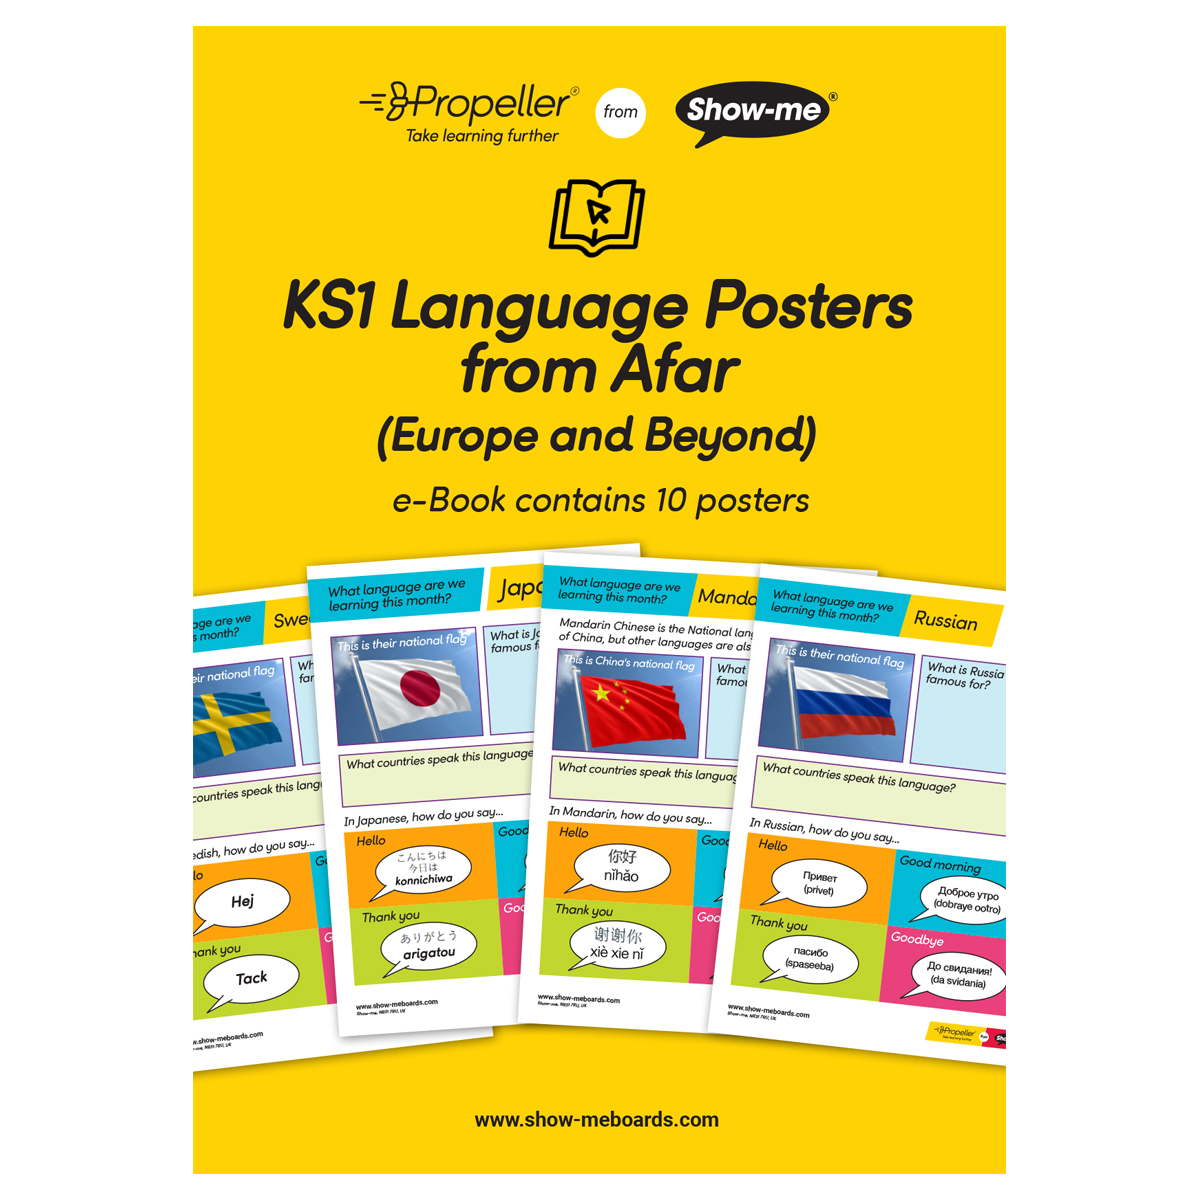 KS1 Language Posters from Afar – Download